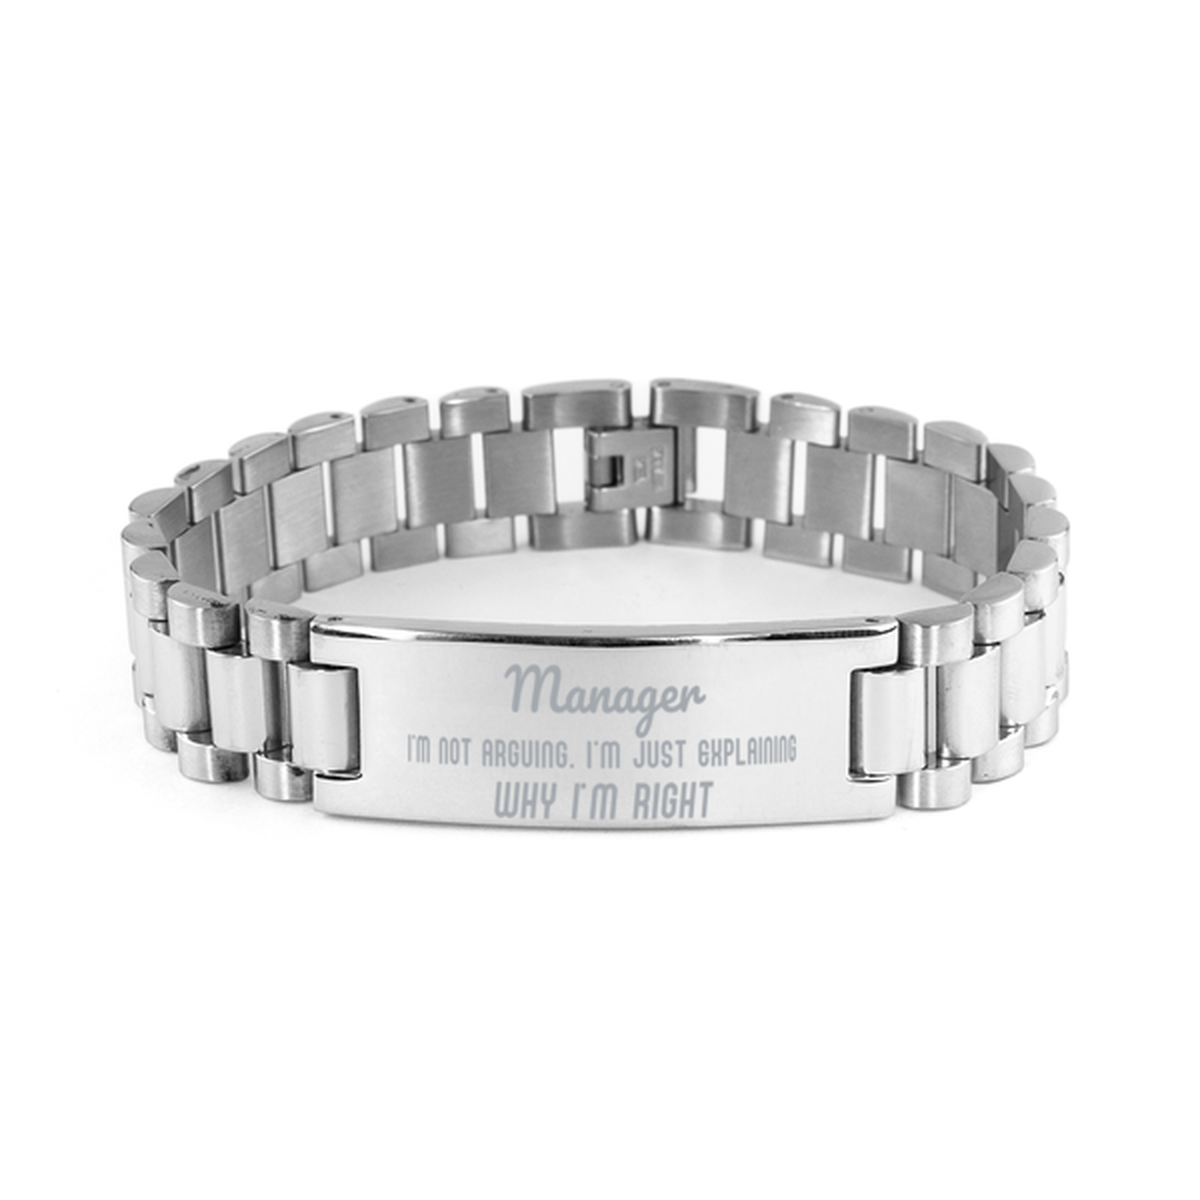 Manager I'm not Arguing. I'm Just Explaining Why I'm RIGHT Ladder Stainless Steel Bracelet, Graduation Birthday Christmas Manager Gifts For Manager Funny Saying Quote Present for Men Women Coworker